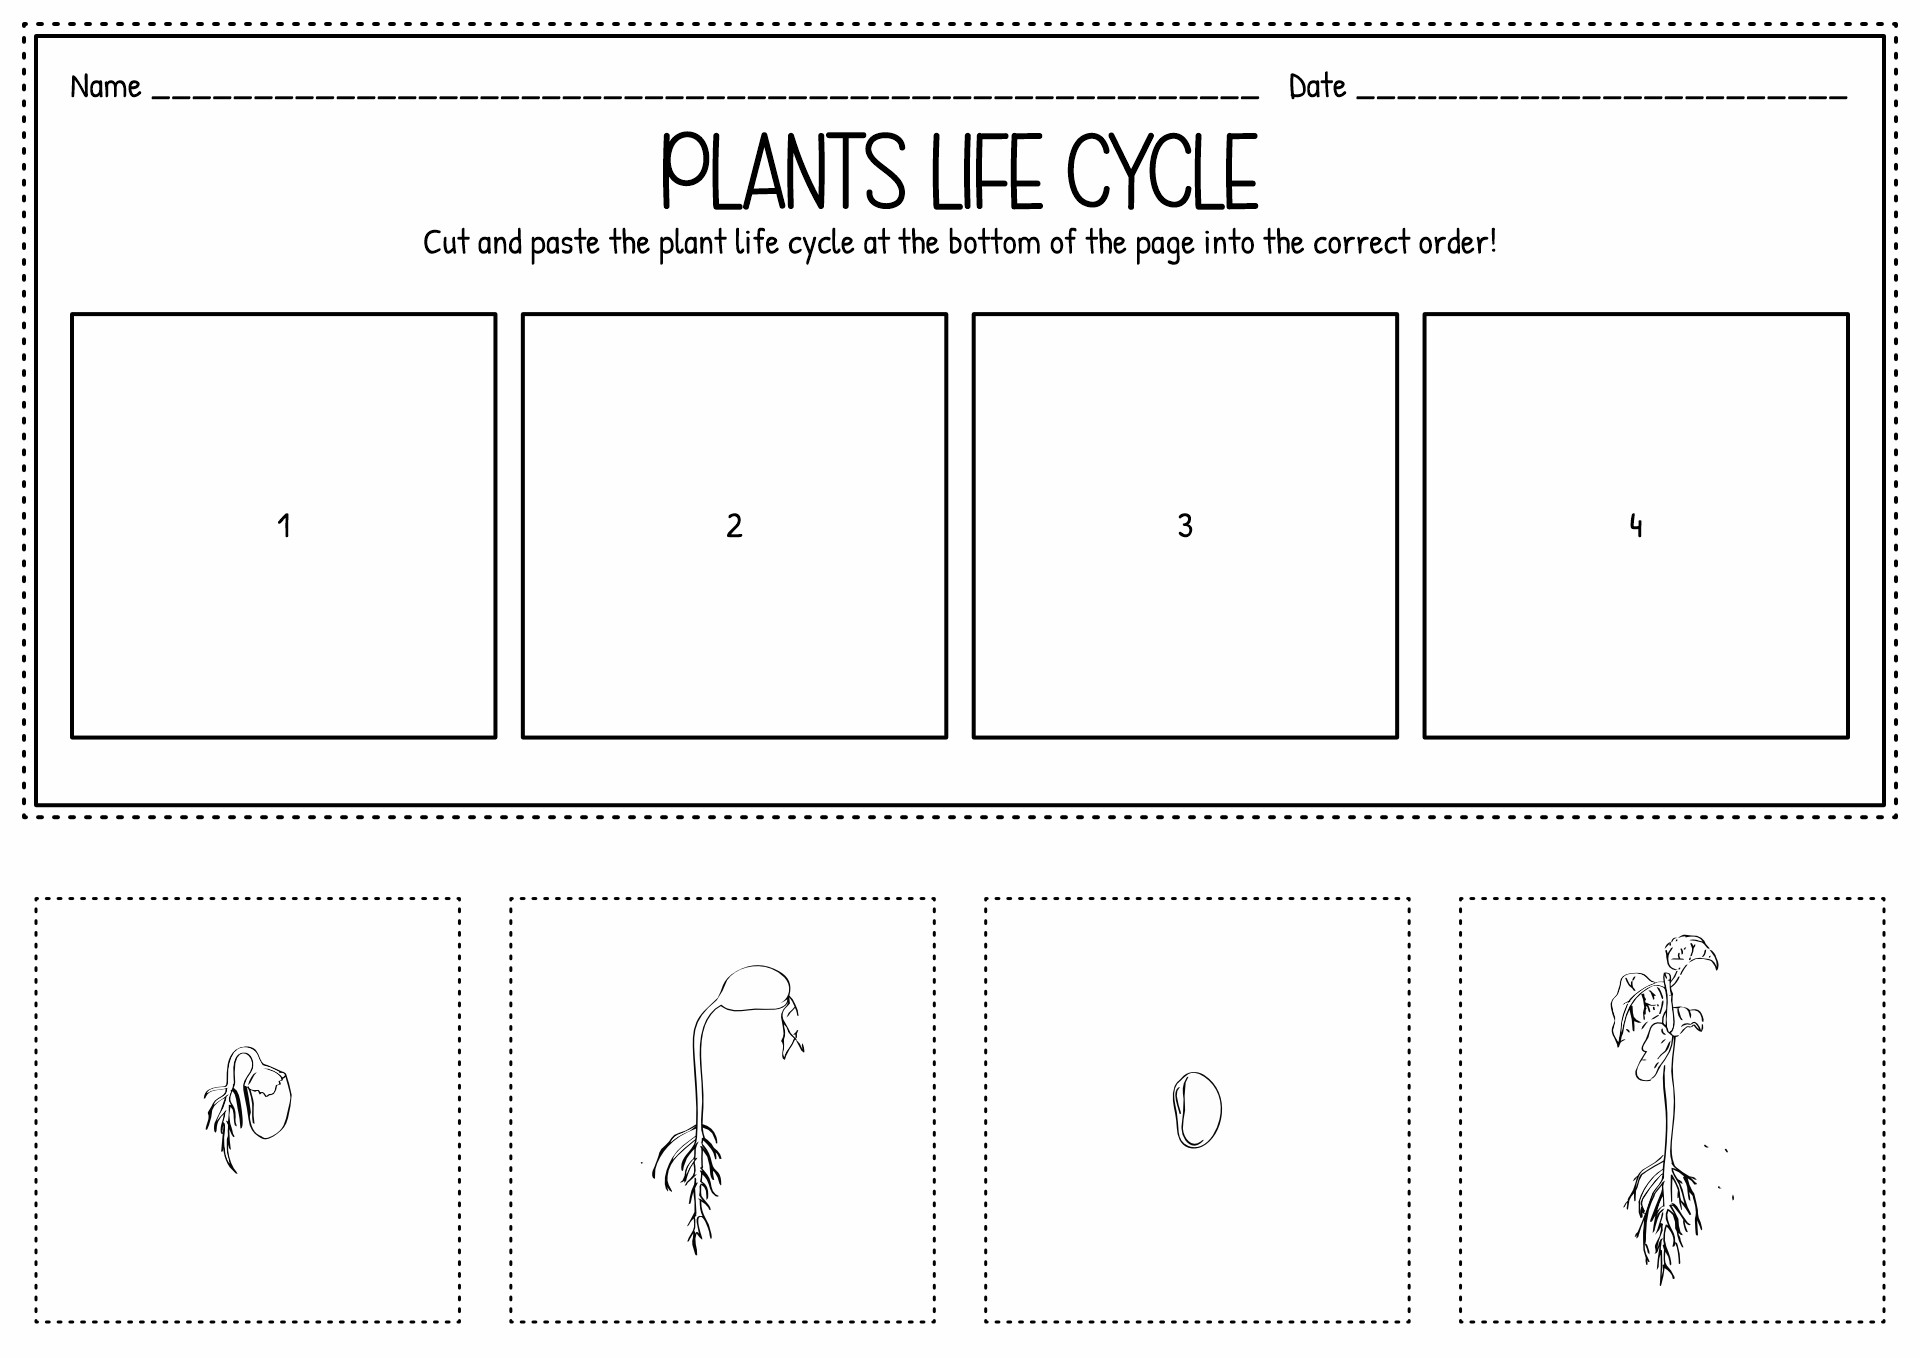 Plant Life Cycle Cut and Paste Image